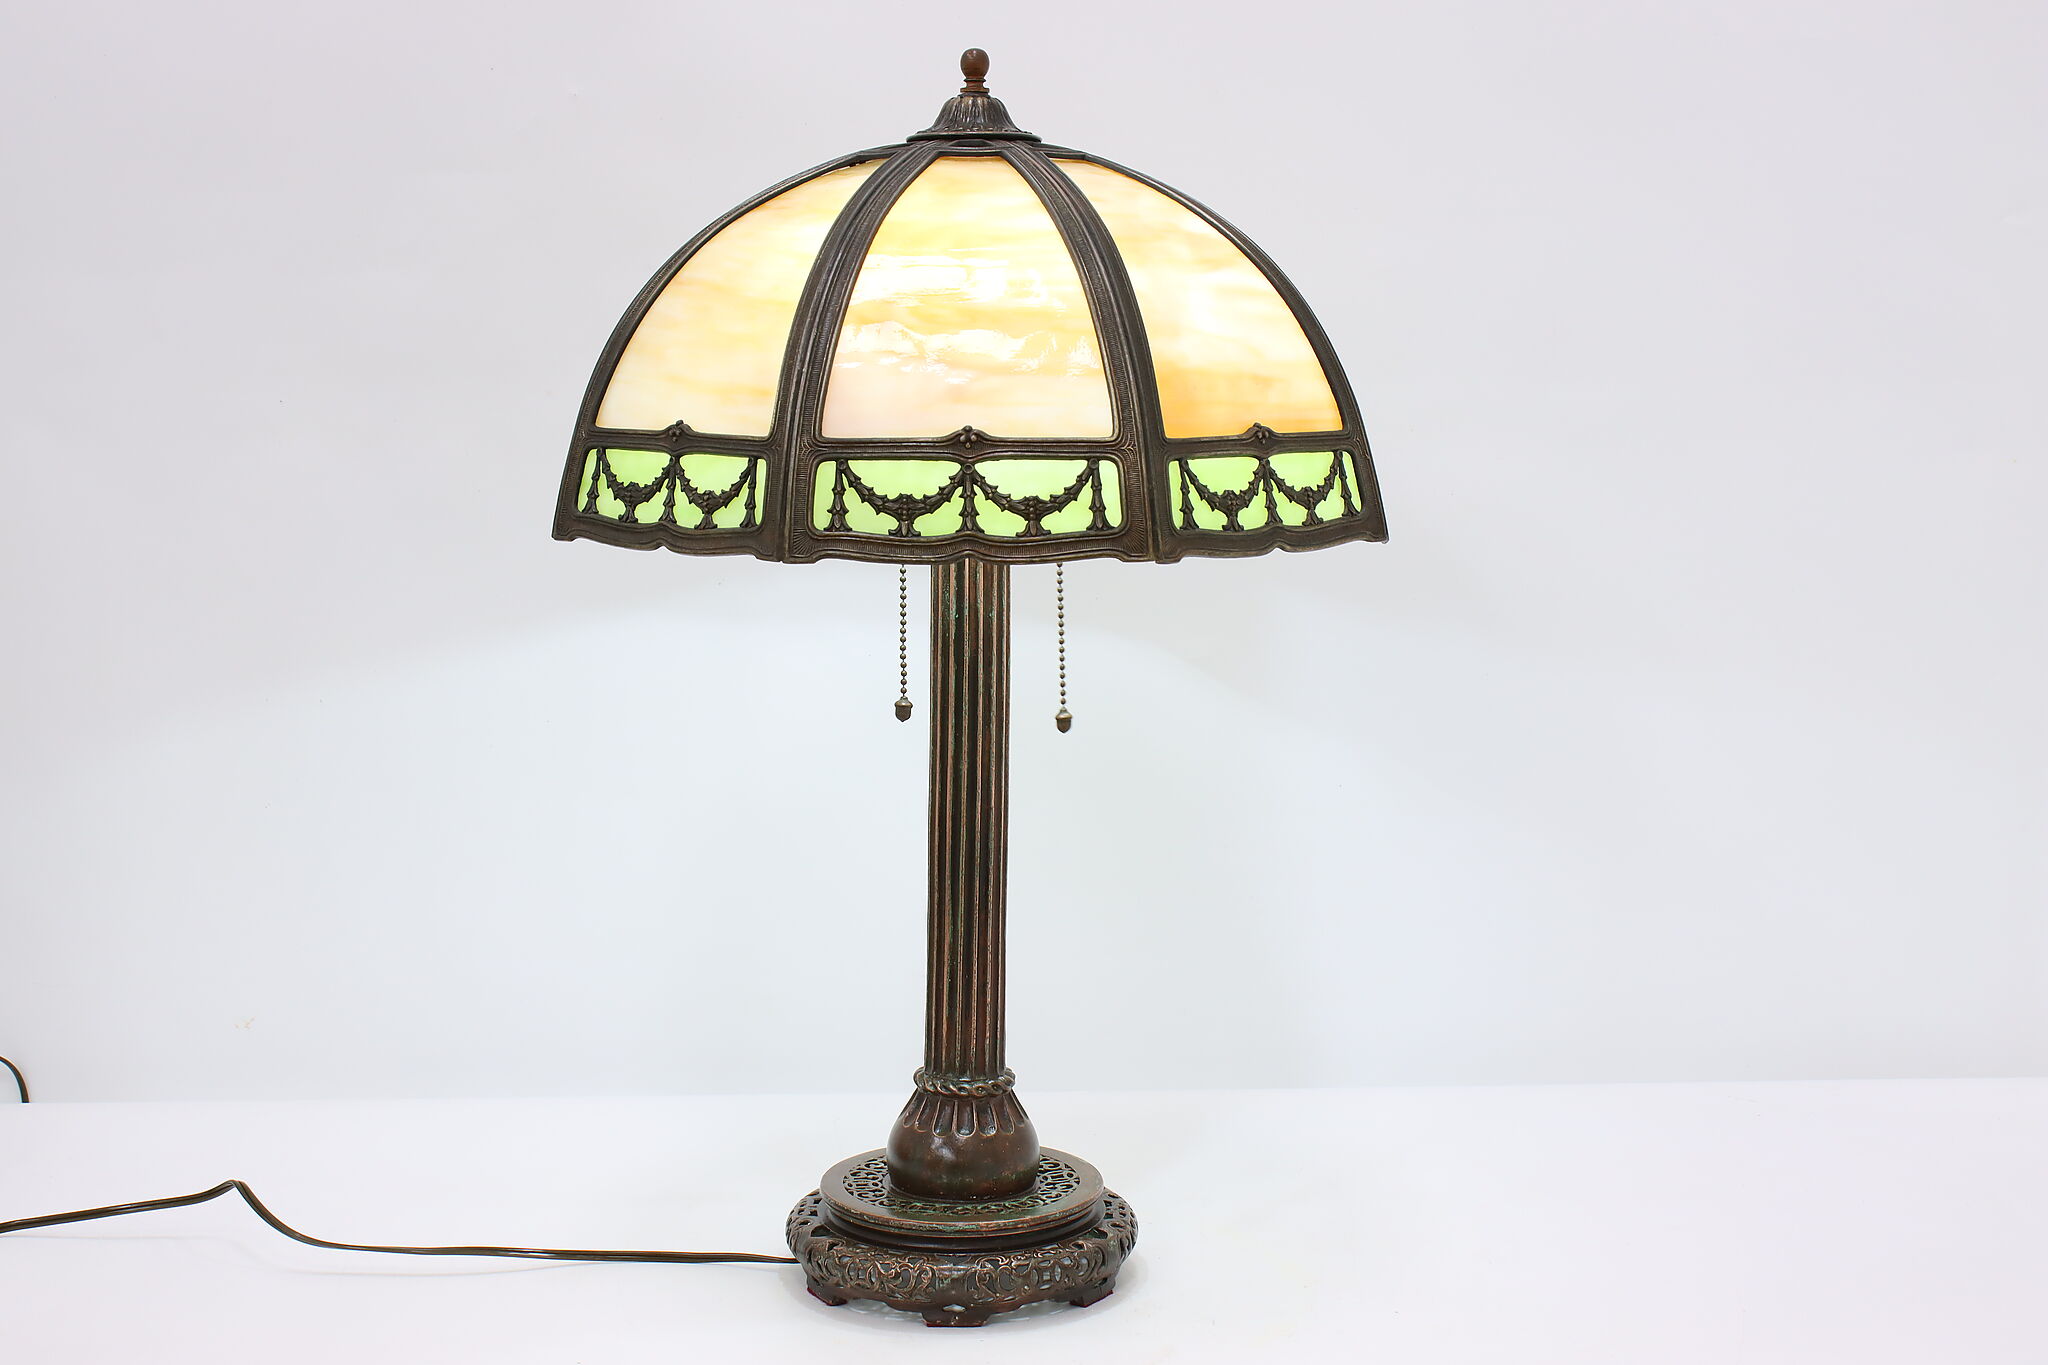 Bronze & Stained Glass Classical Antique Office Library Lamp